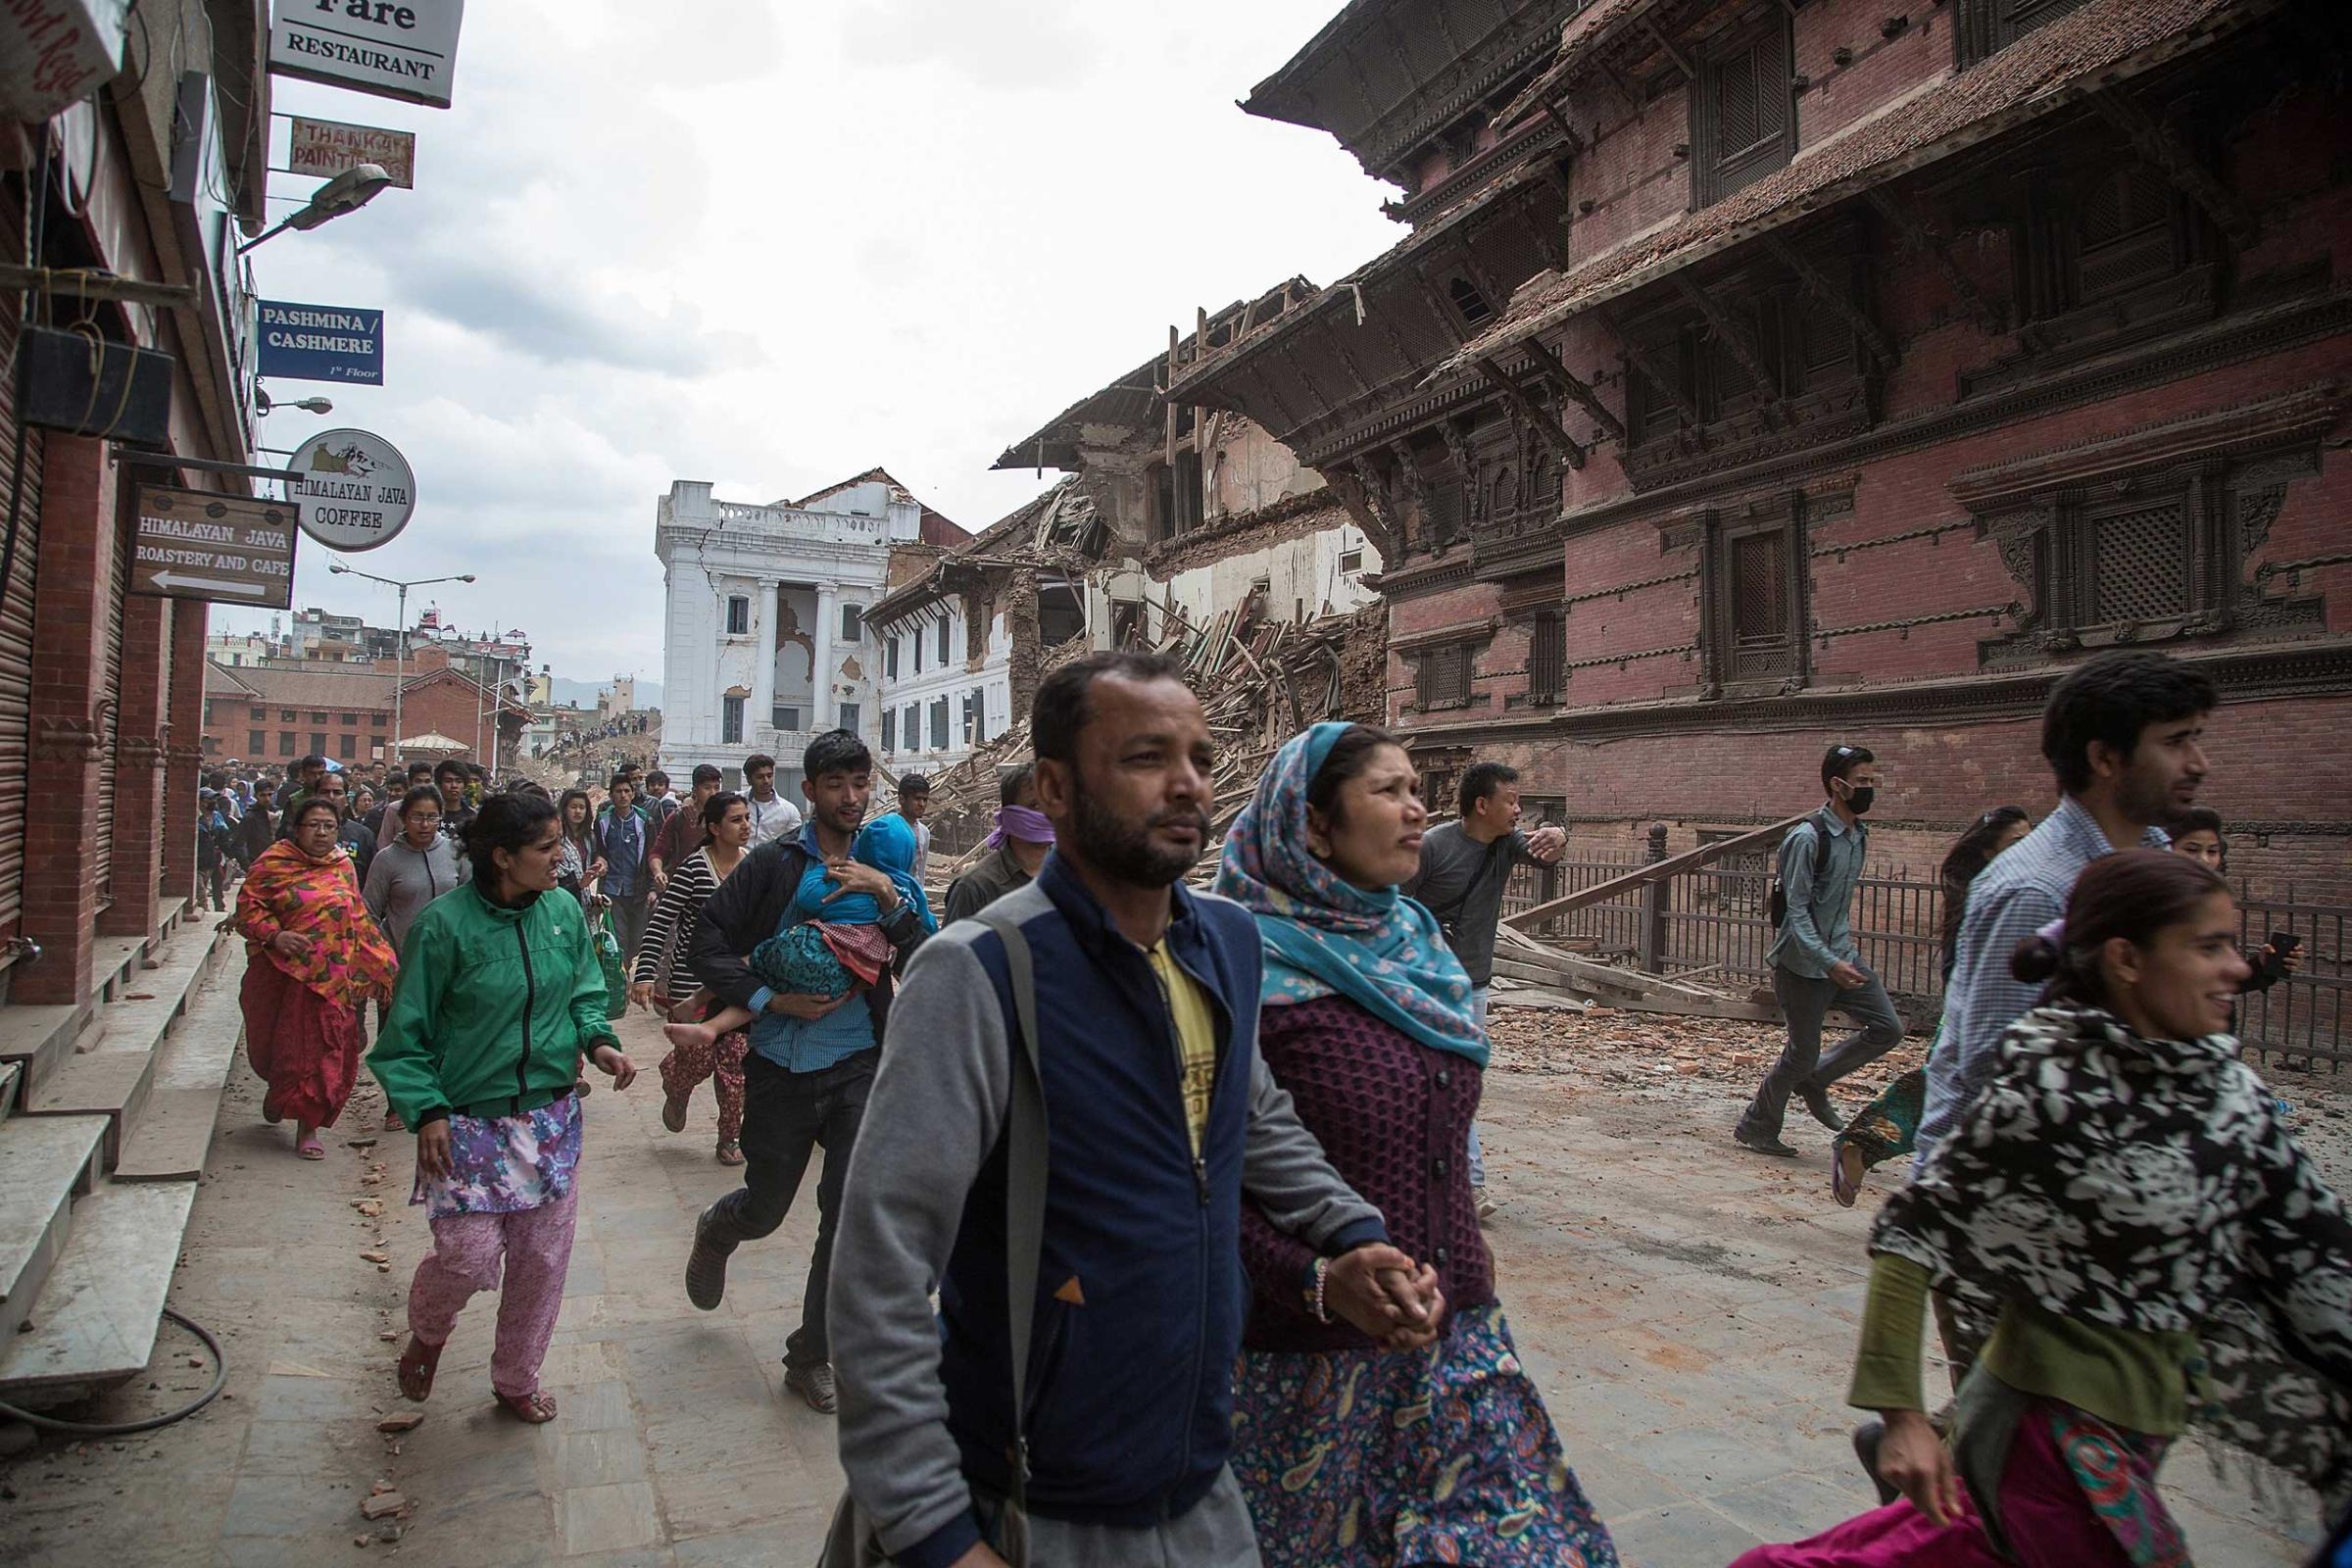 Kathmandu residents run to shelters after a replica tremor hit the city on April 25, 2015.